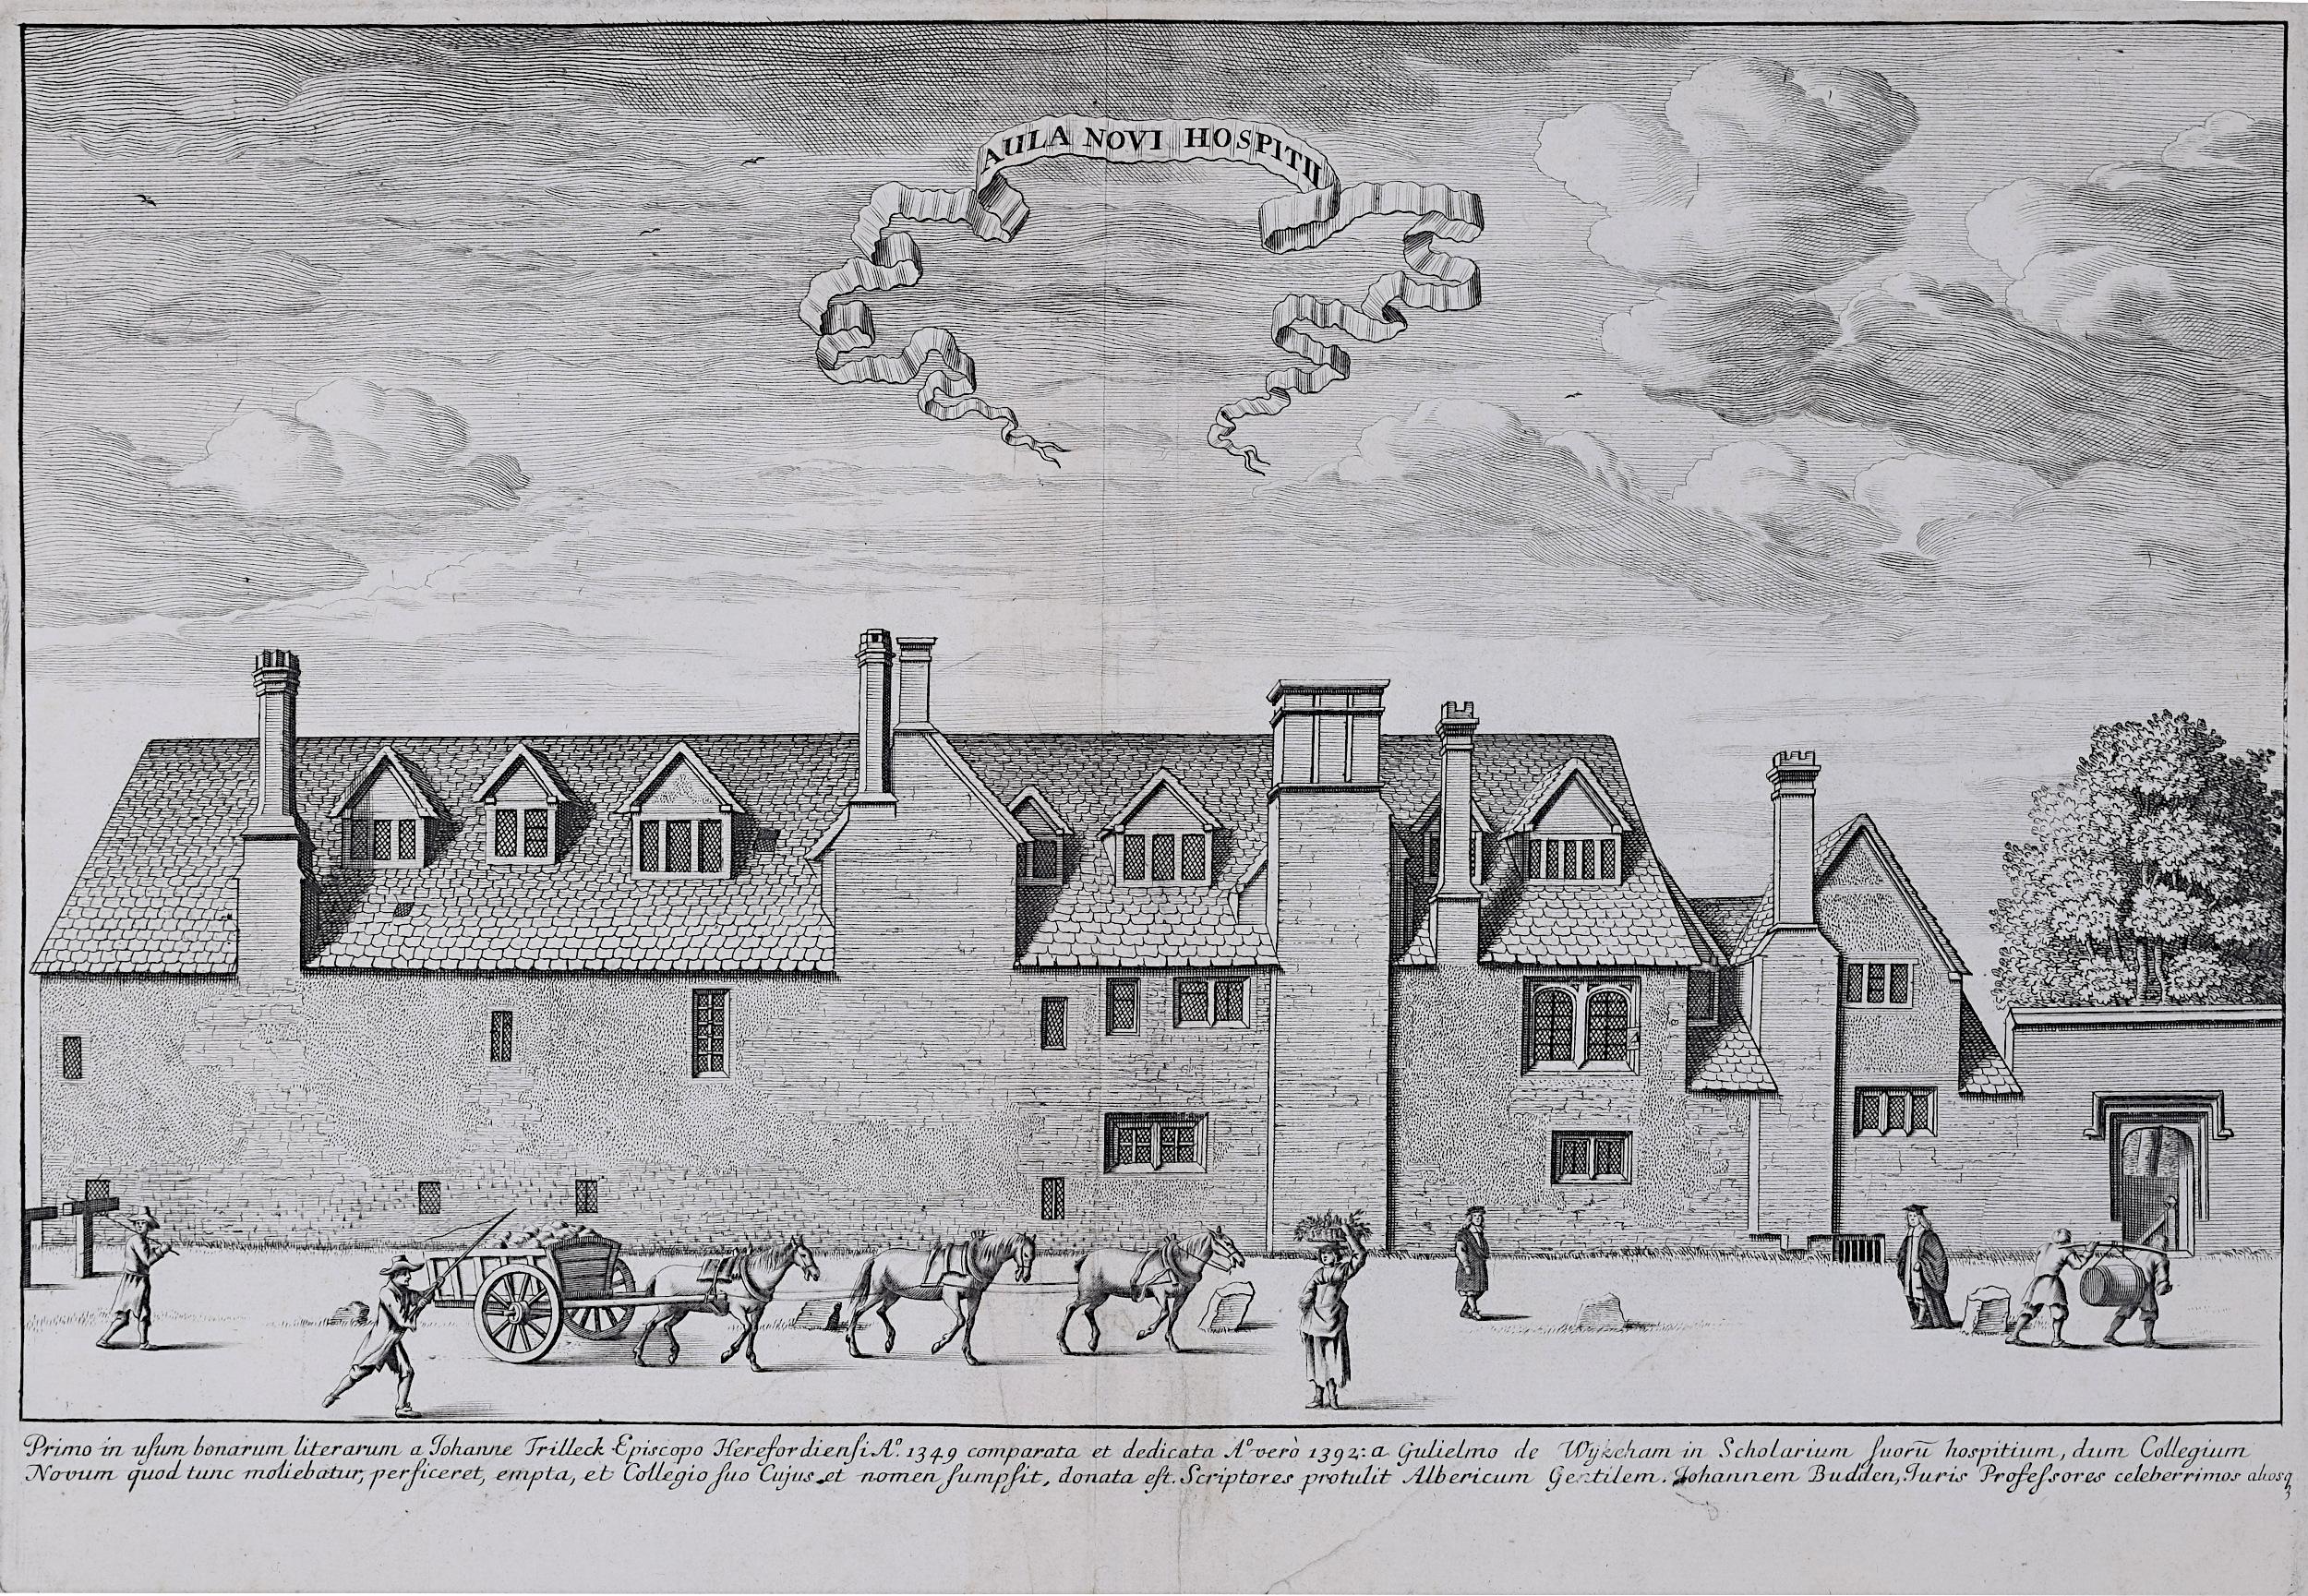 David Loggan (1634-1692)
St Peter's College Oxford - New Inn Hall, Aula Novi Hospitii
Engraving 1675
25x36cm

Baptised in Danzig in 1634 Loggan's parents were English and Scottish. Studying engraving in Danzig with Willem Hondius (1598-1652 or 1658)